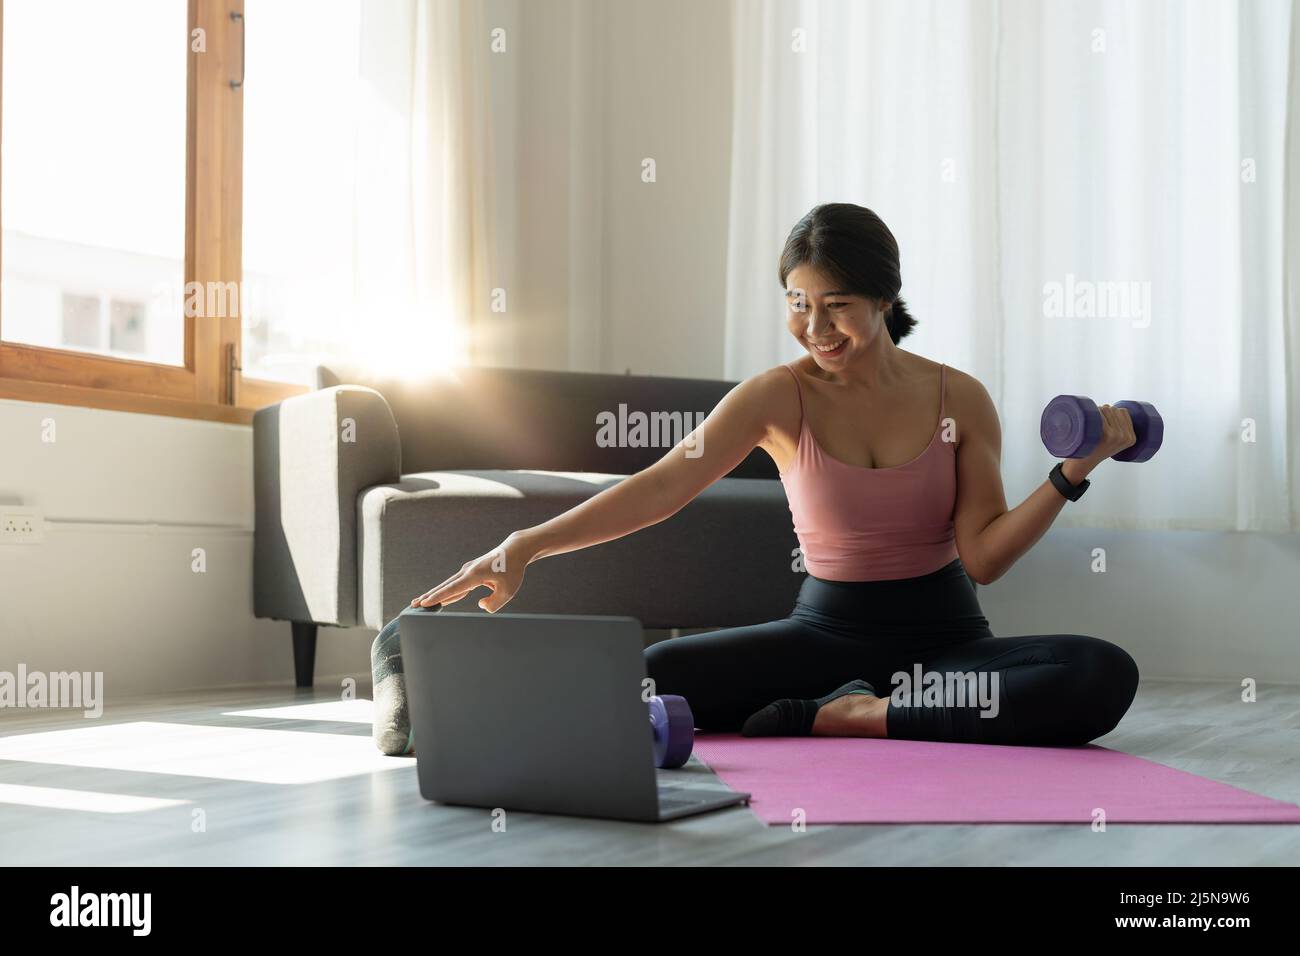 Young woman is exercising yoga at home. Fitness, workout, healthy living and diet concept Stock Photo